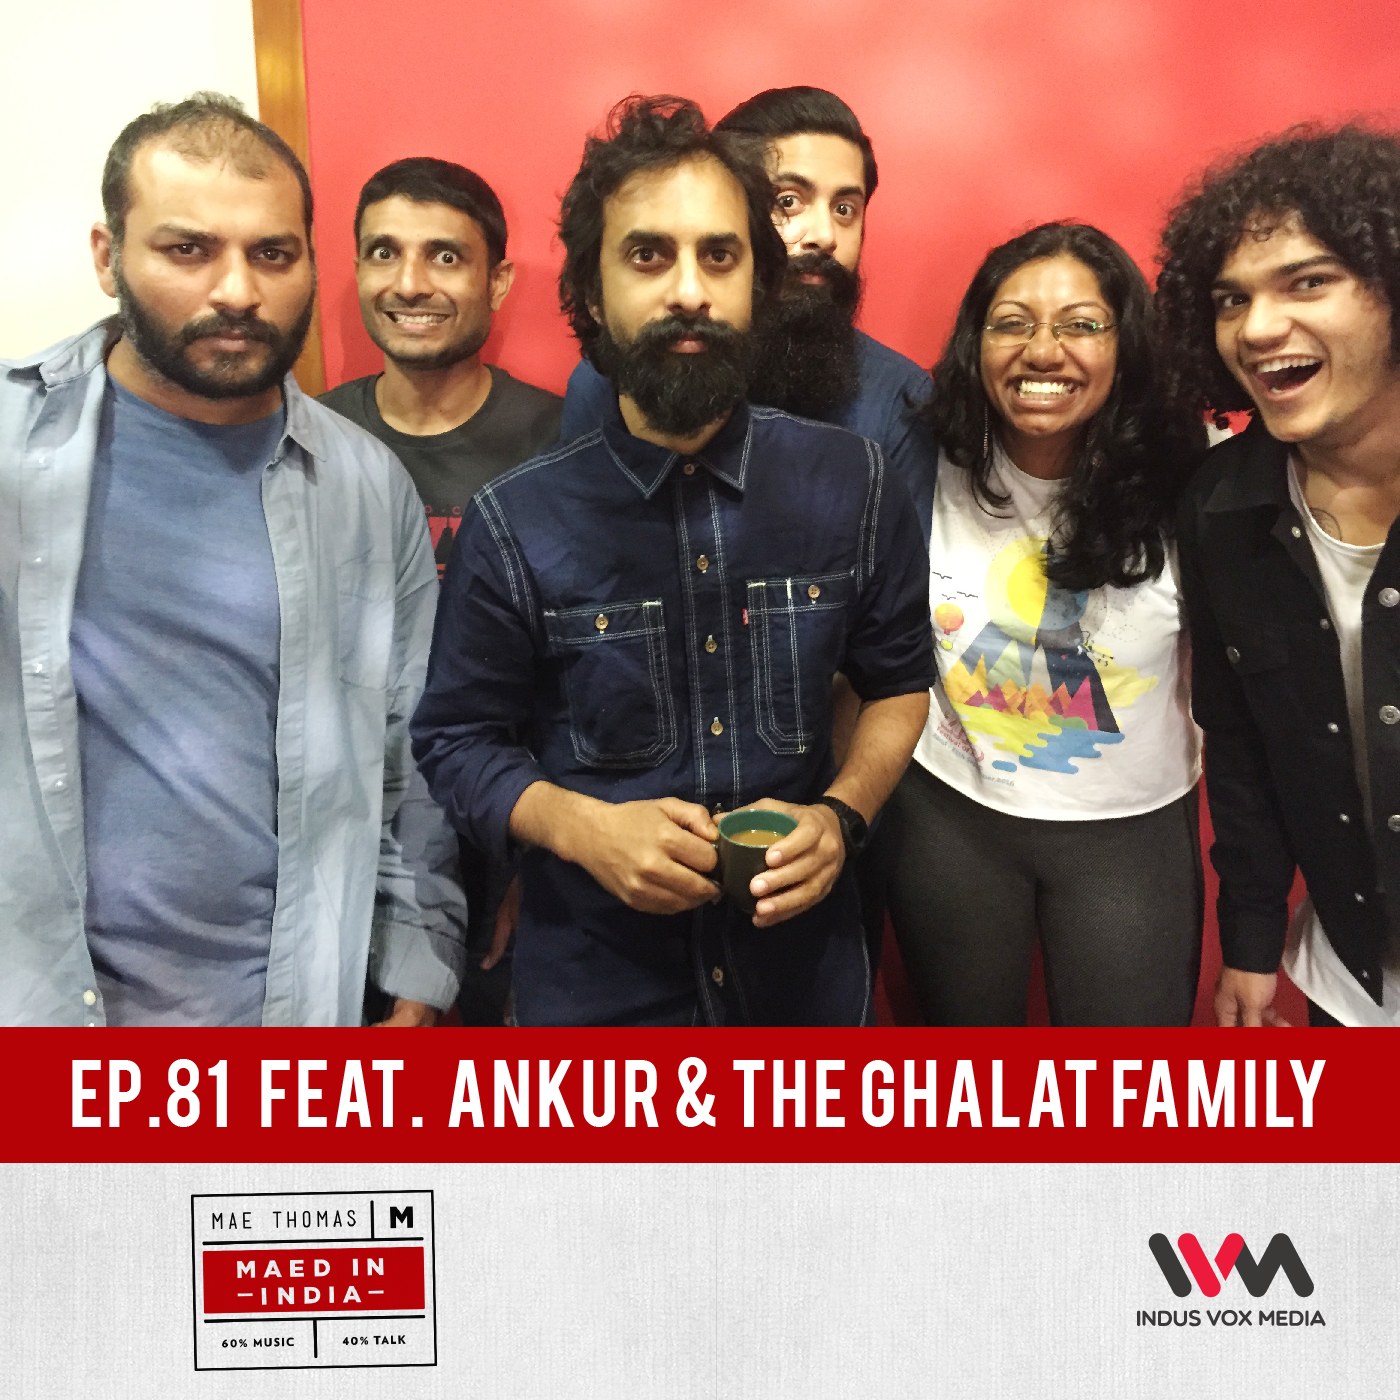 Ep. 81 feat. Ankur & The Ghalat Family